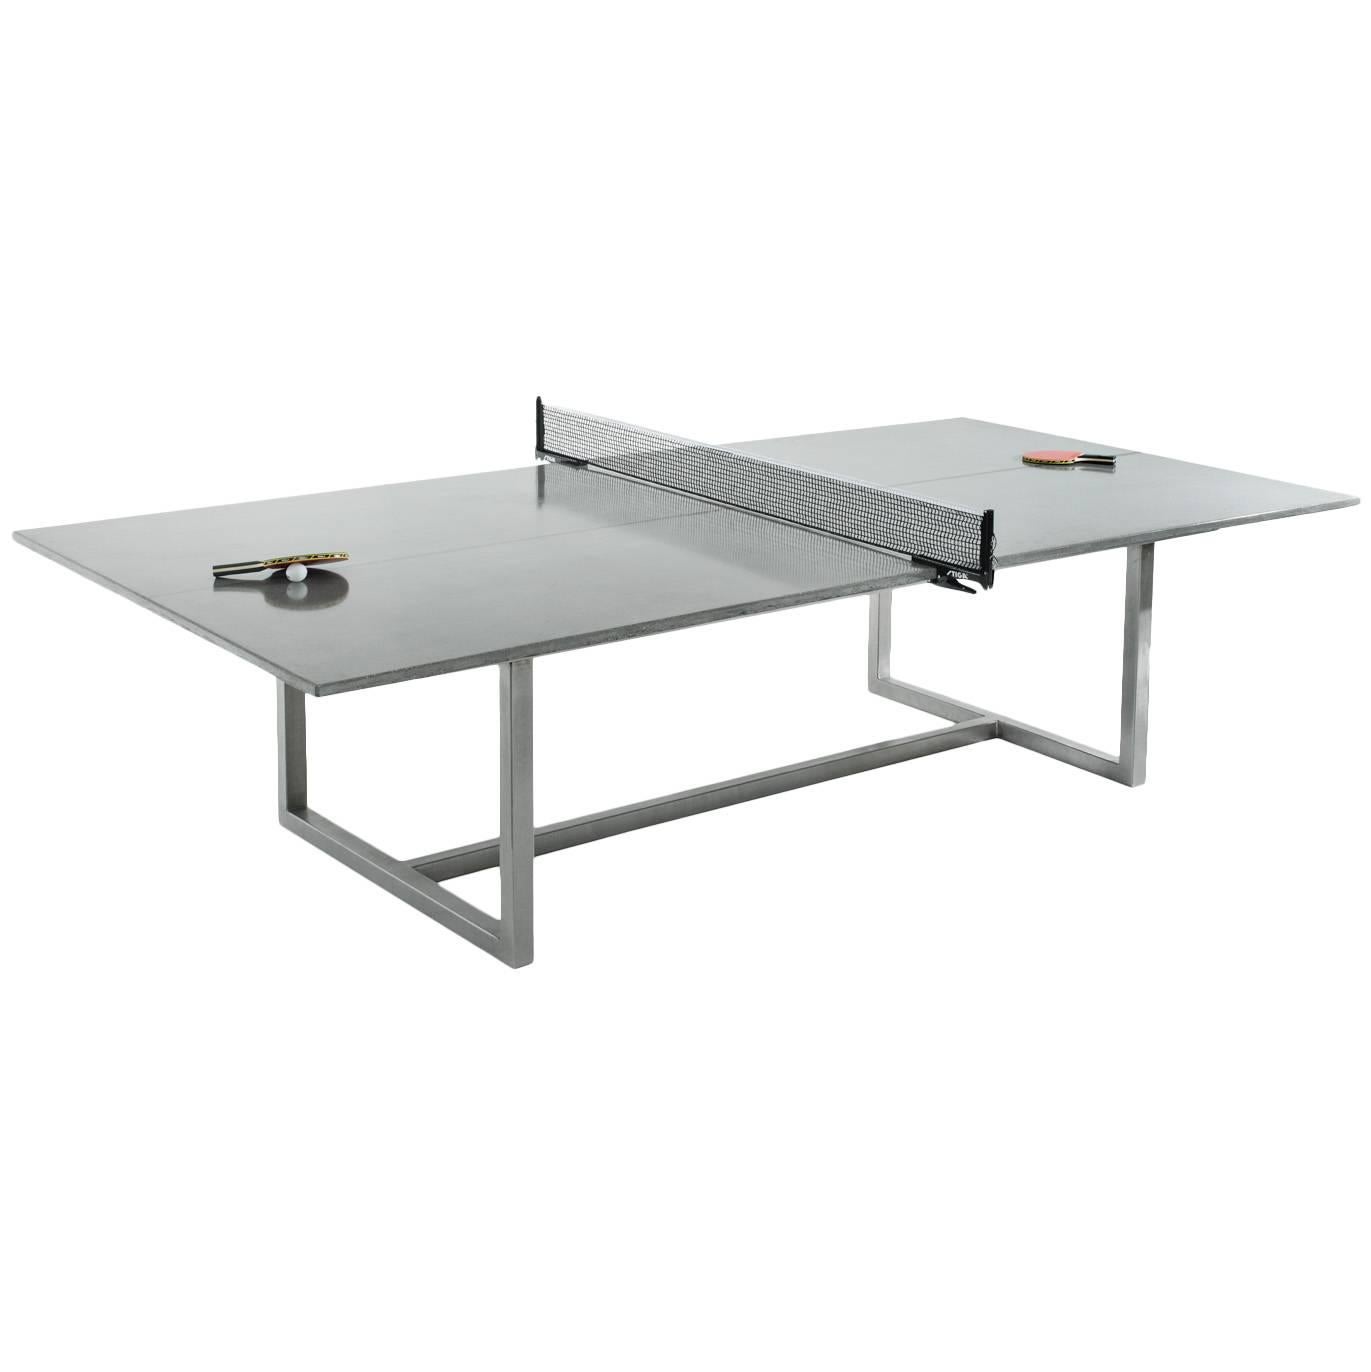 James de Wulf Vue Concrete Ping Pong Table, Stainless Steel Base - Standard For Sale